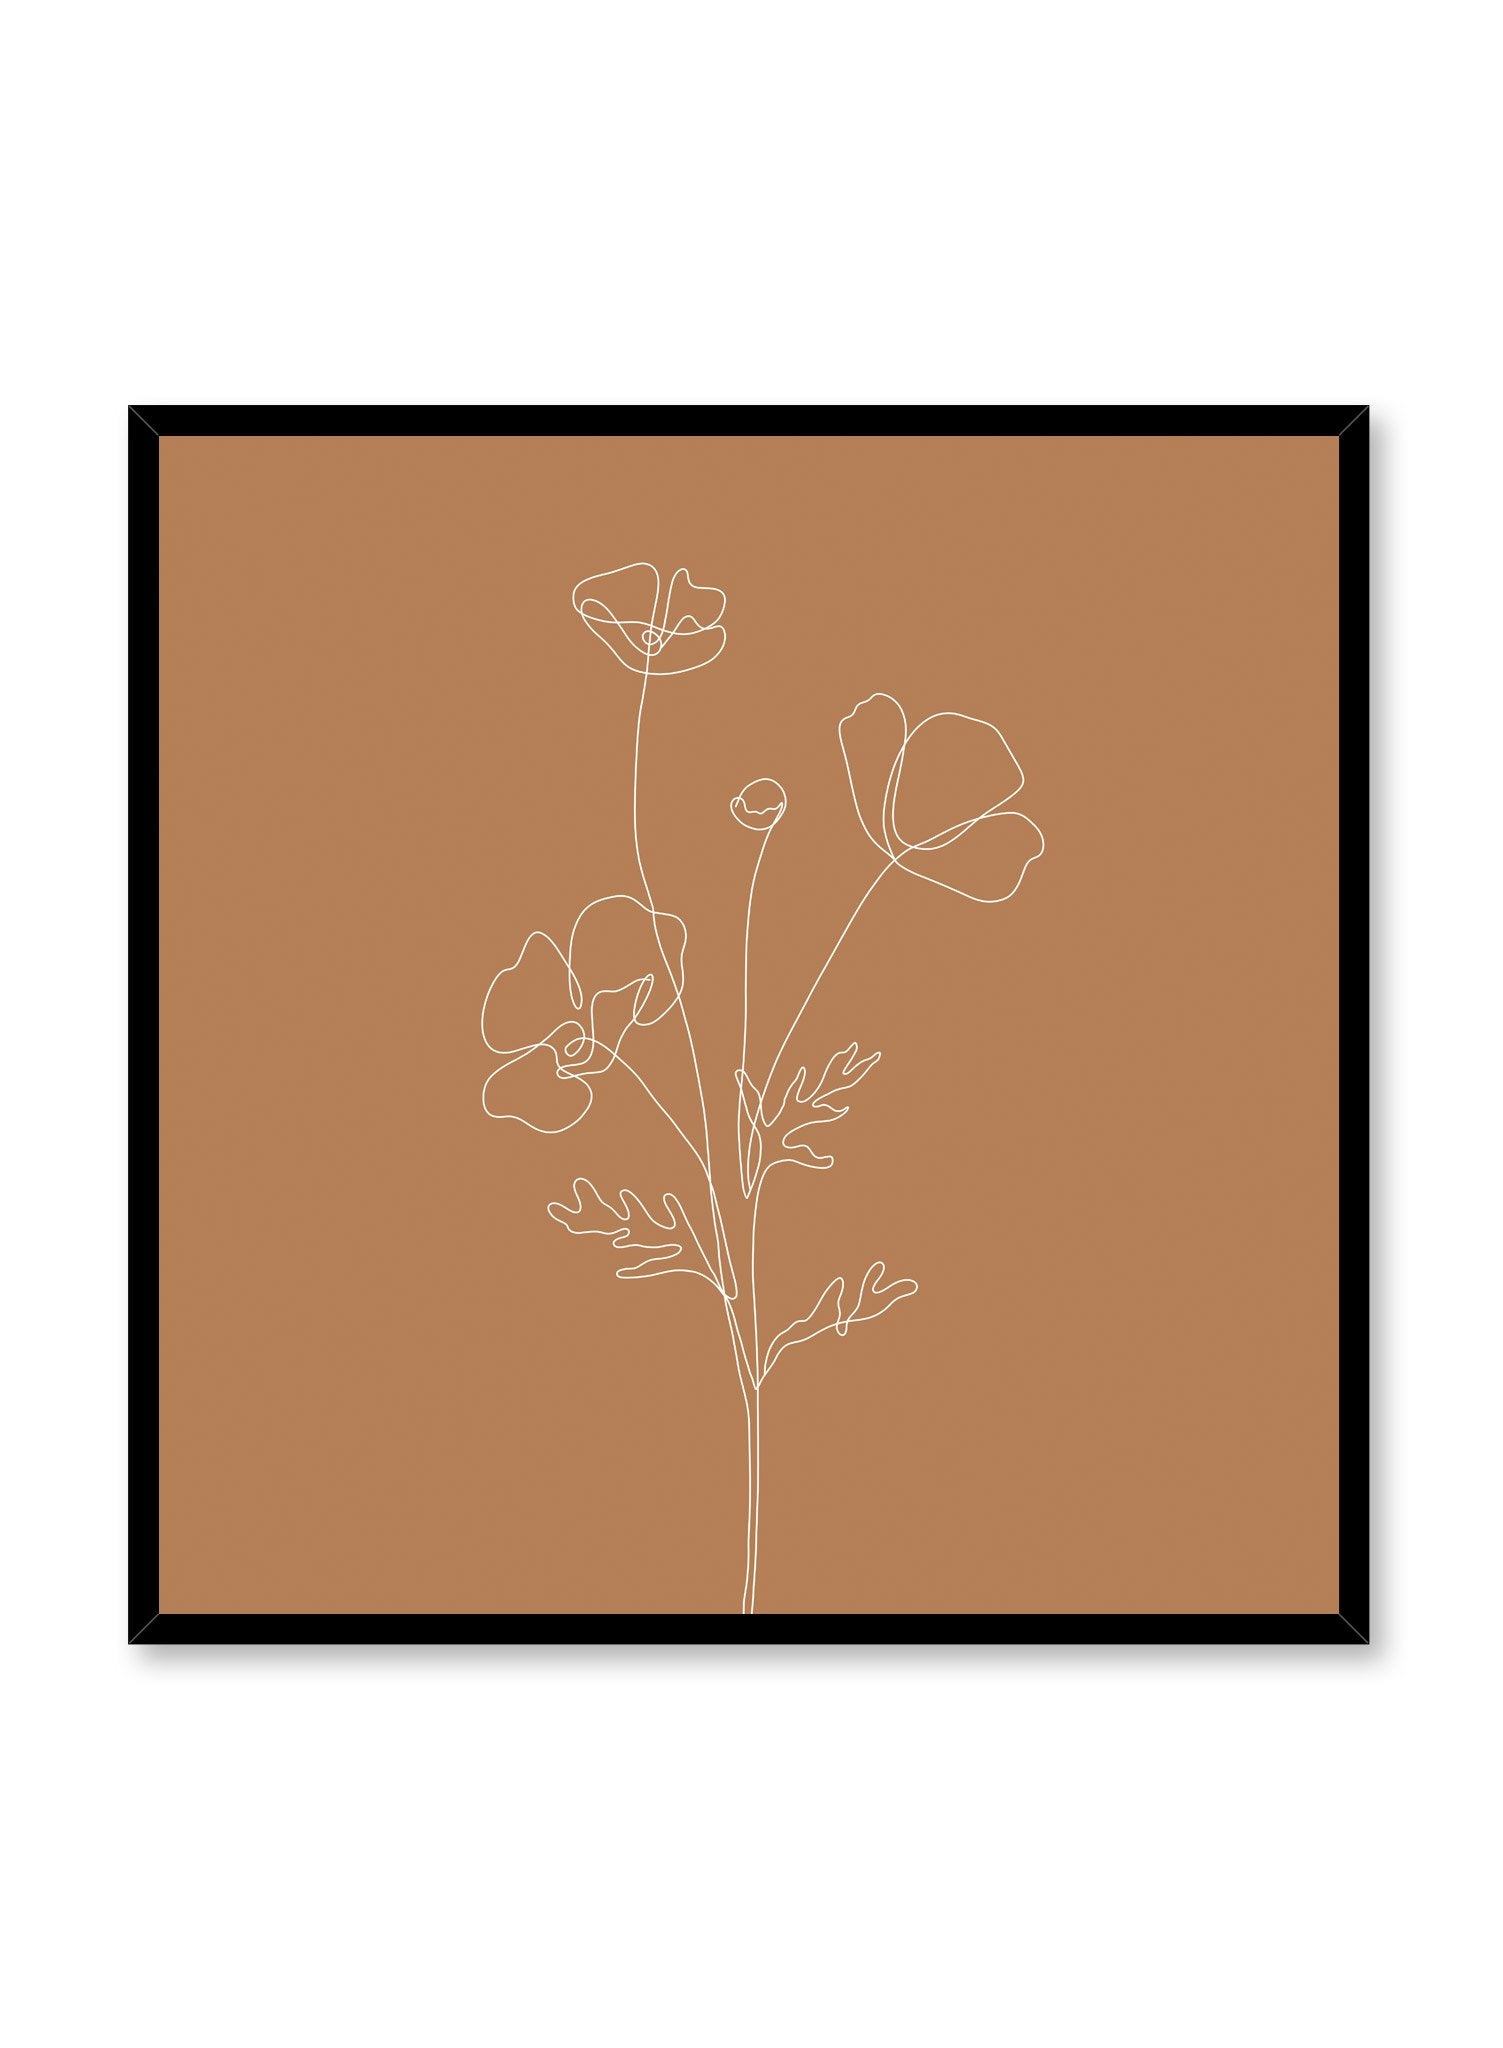 Minimalist design square poster by Opposite Wall with line art drawing of poppy with burnt orange background